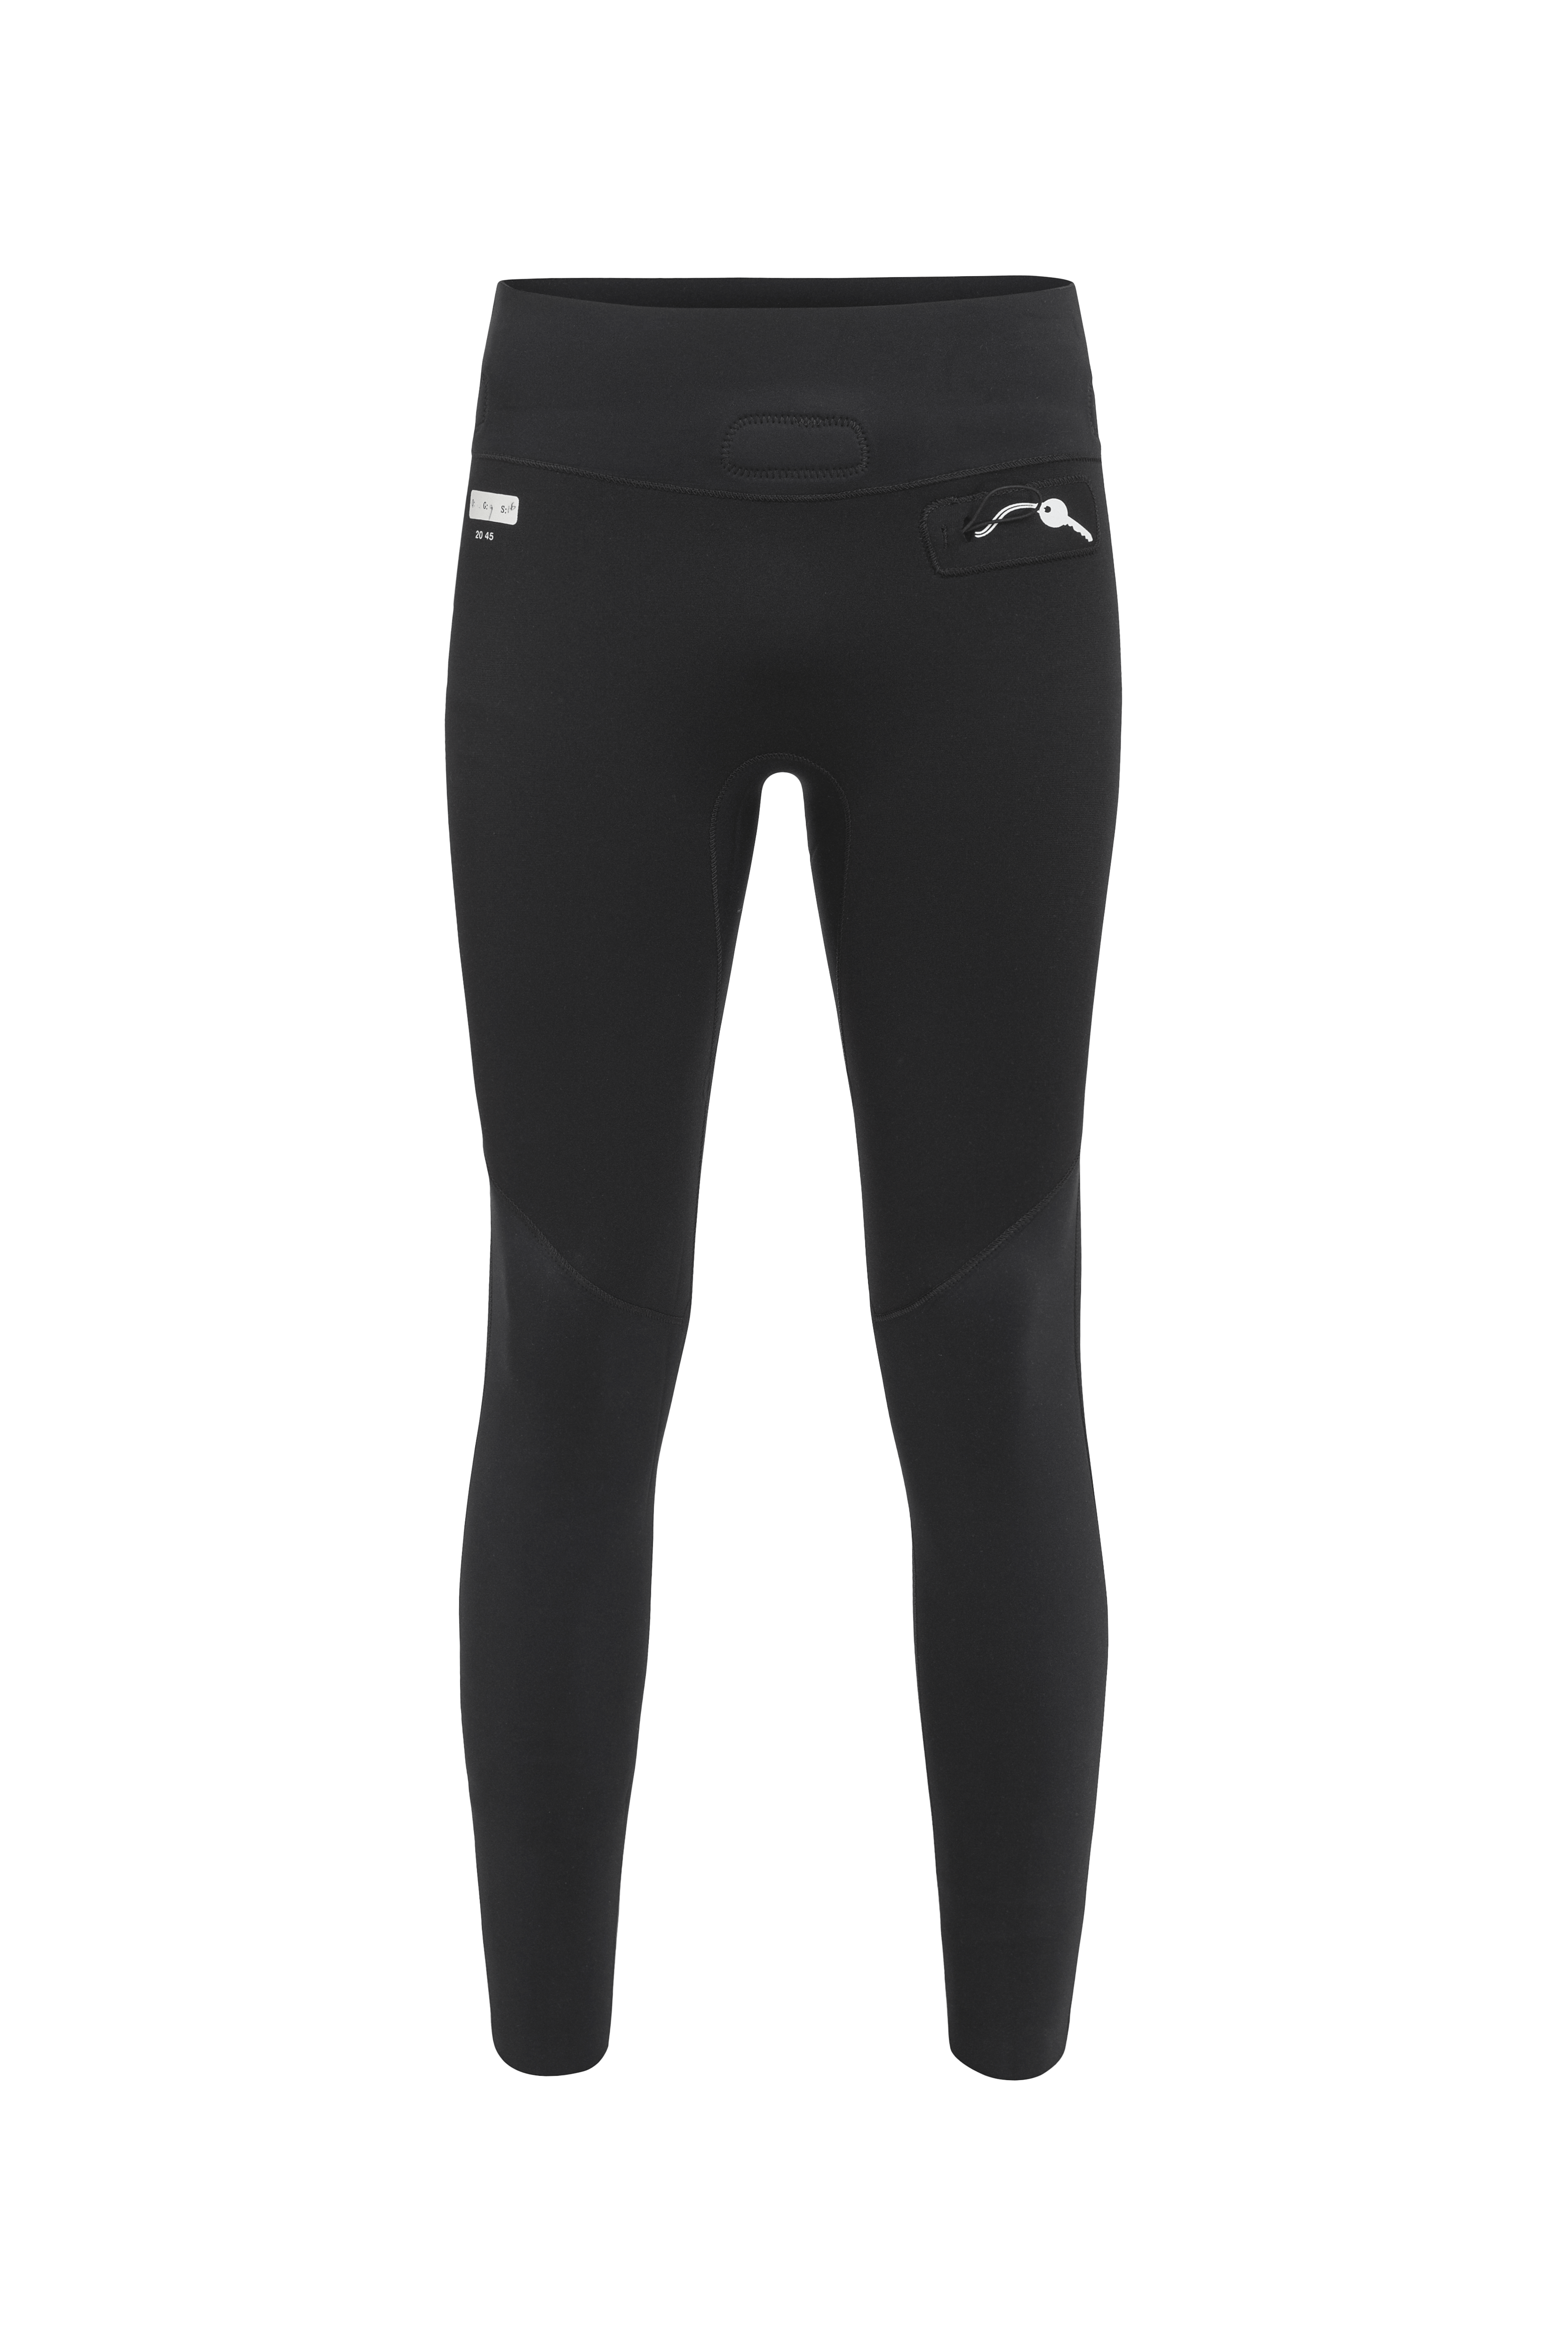 orca Ocean Swimming Openwater RS1 Bottom Mens Wetsuit